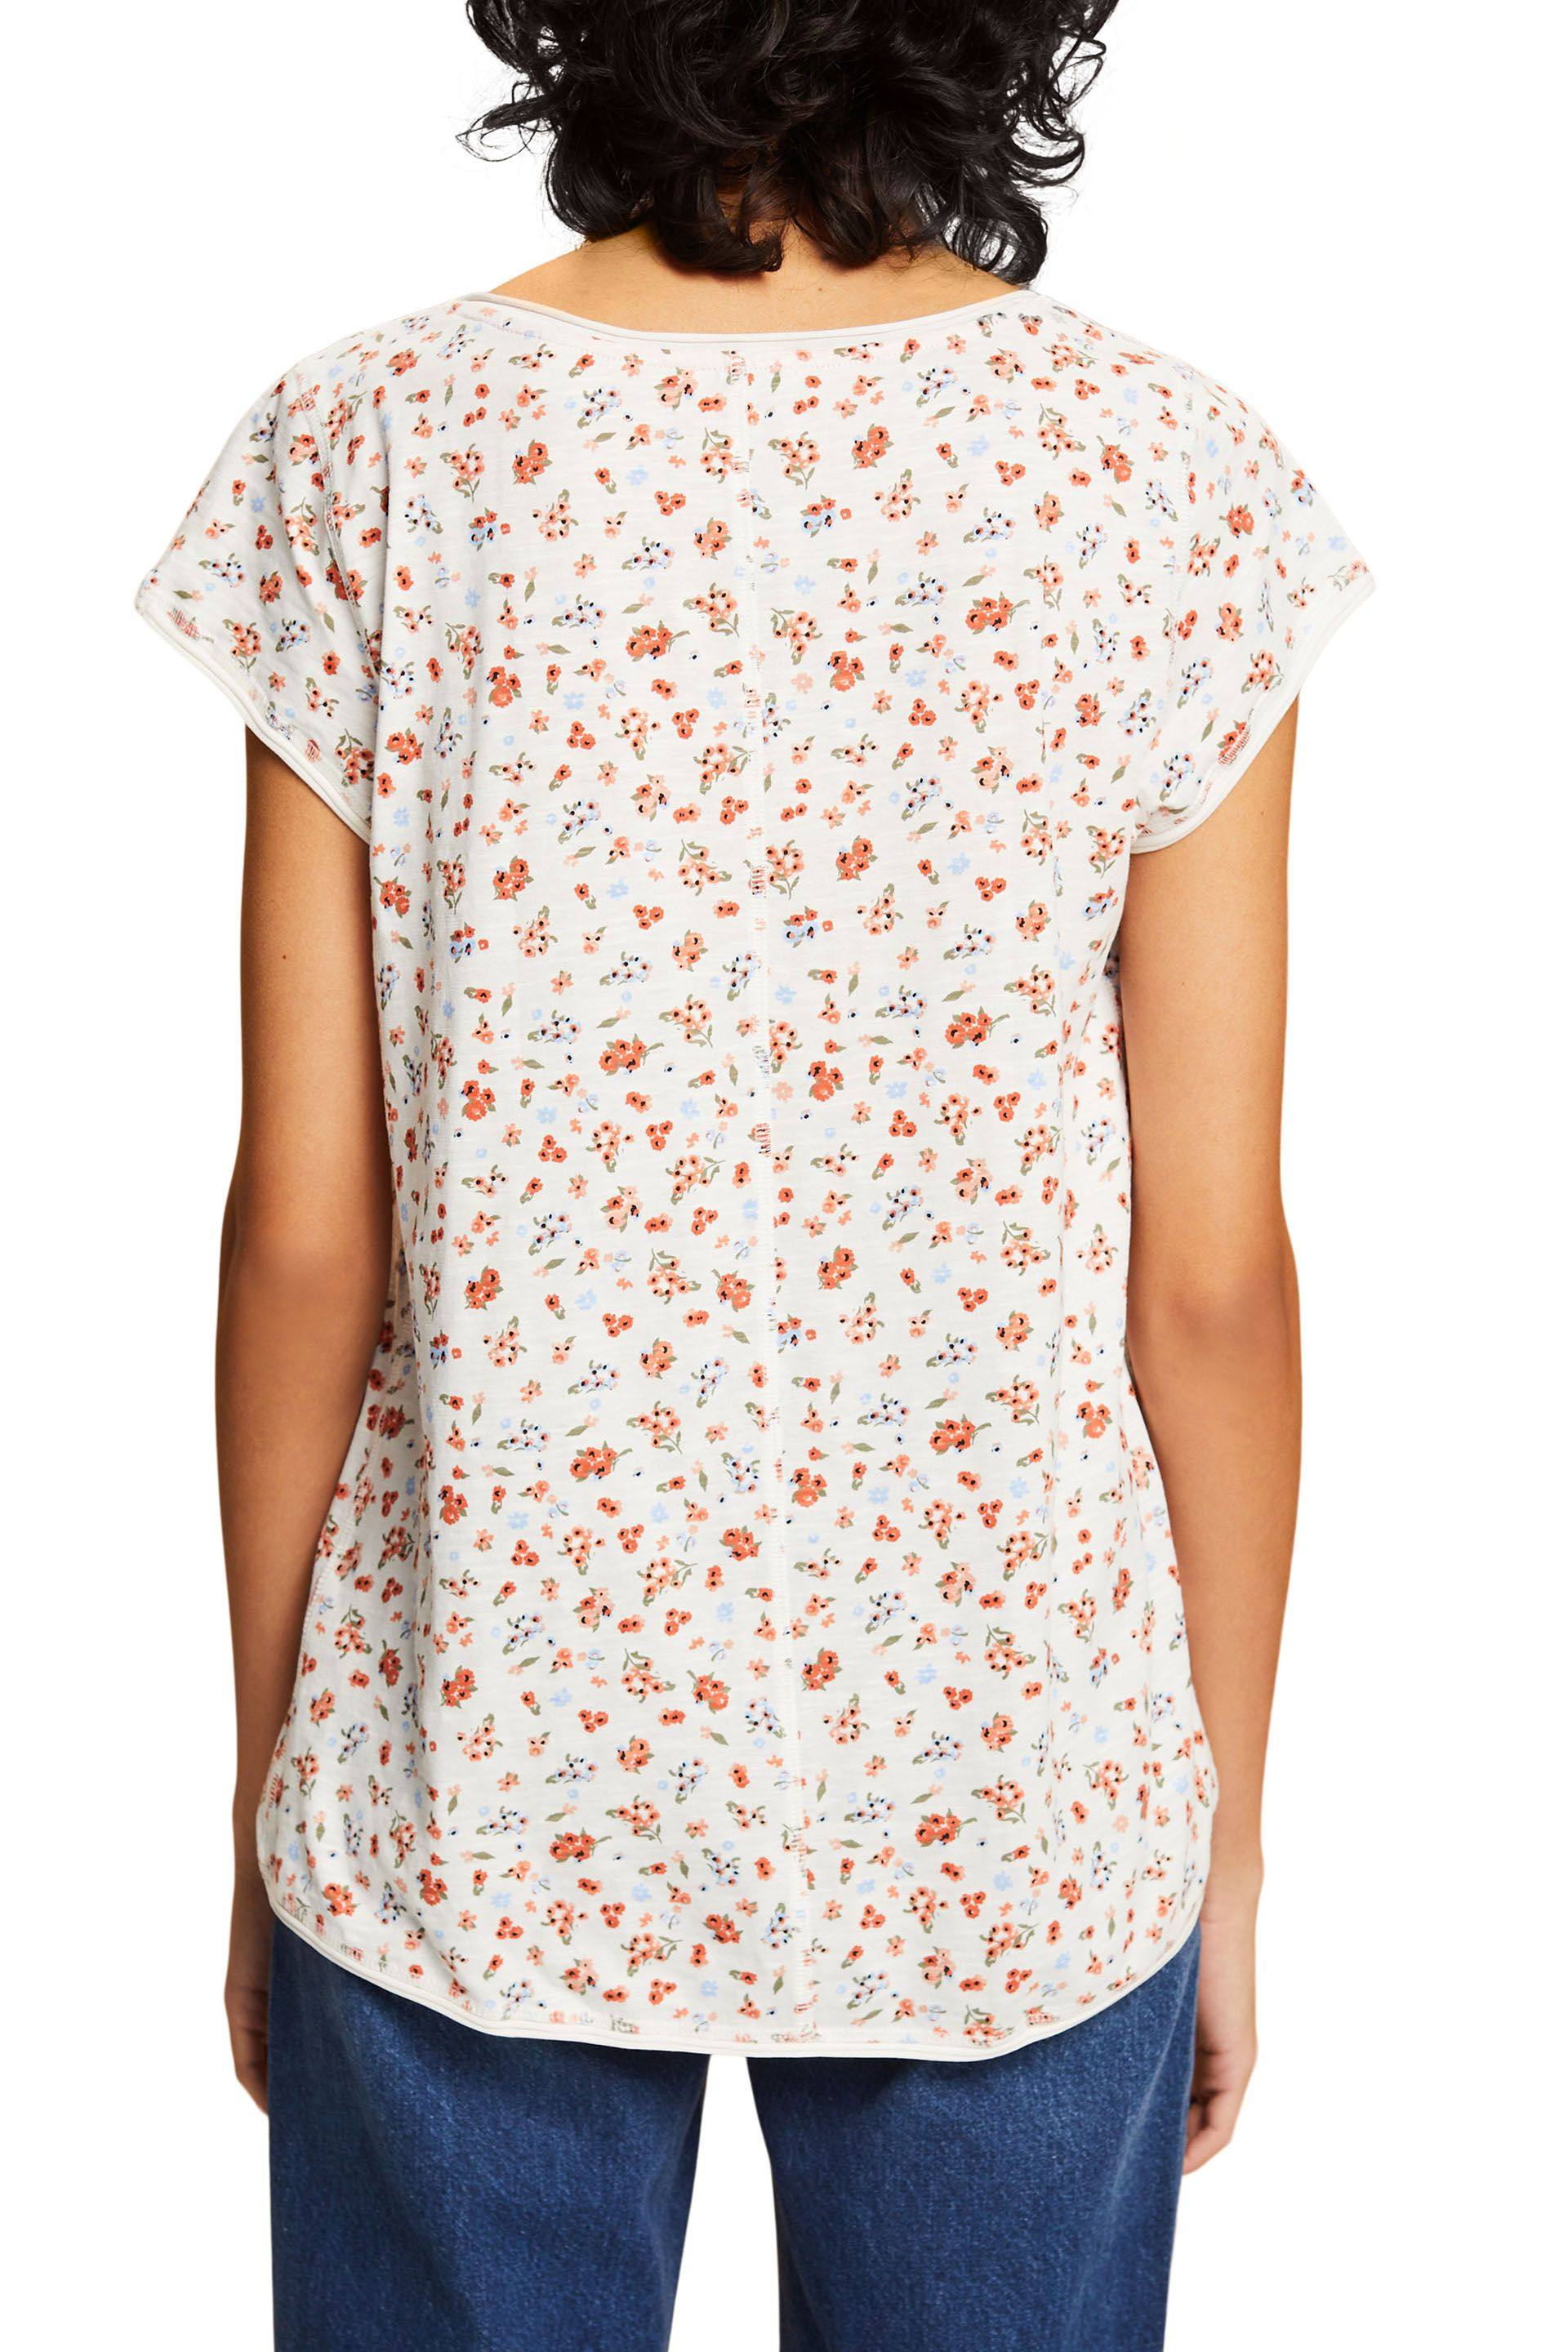 Esprit - Cotton T-shirt with all over print, White, large image number 3